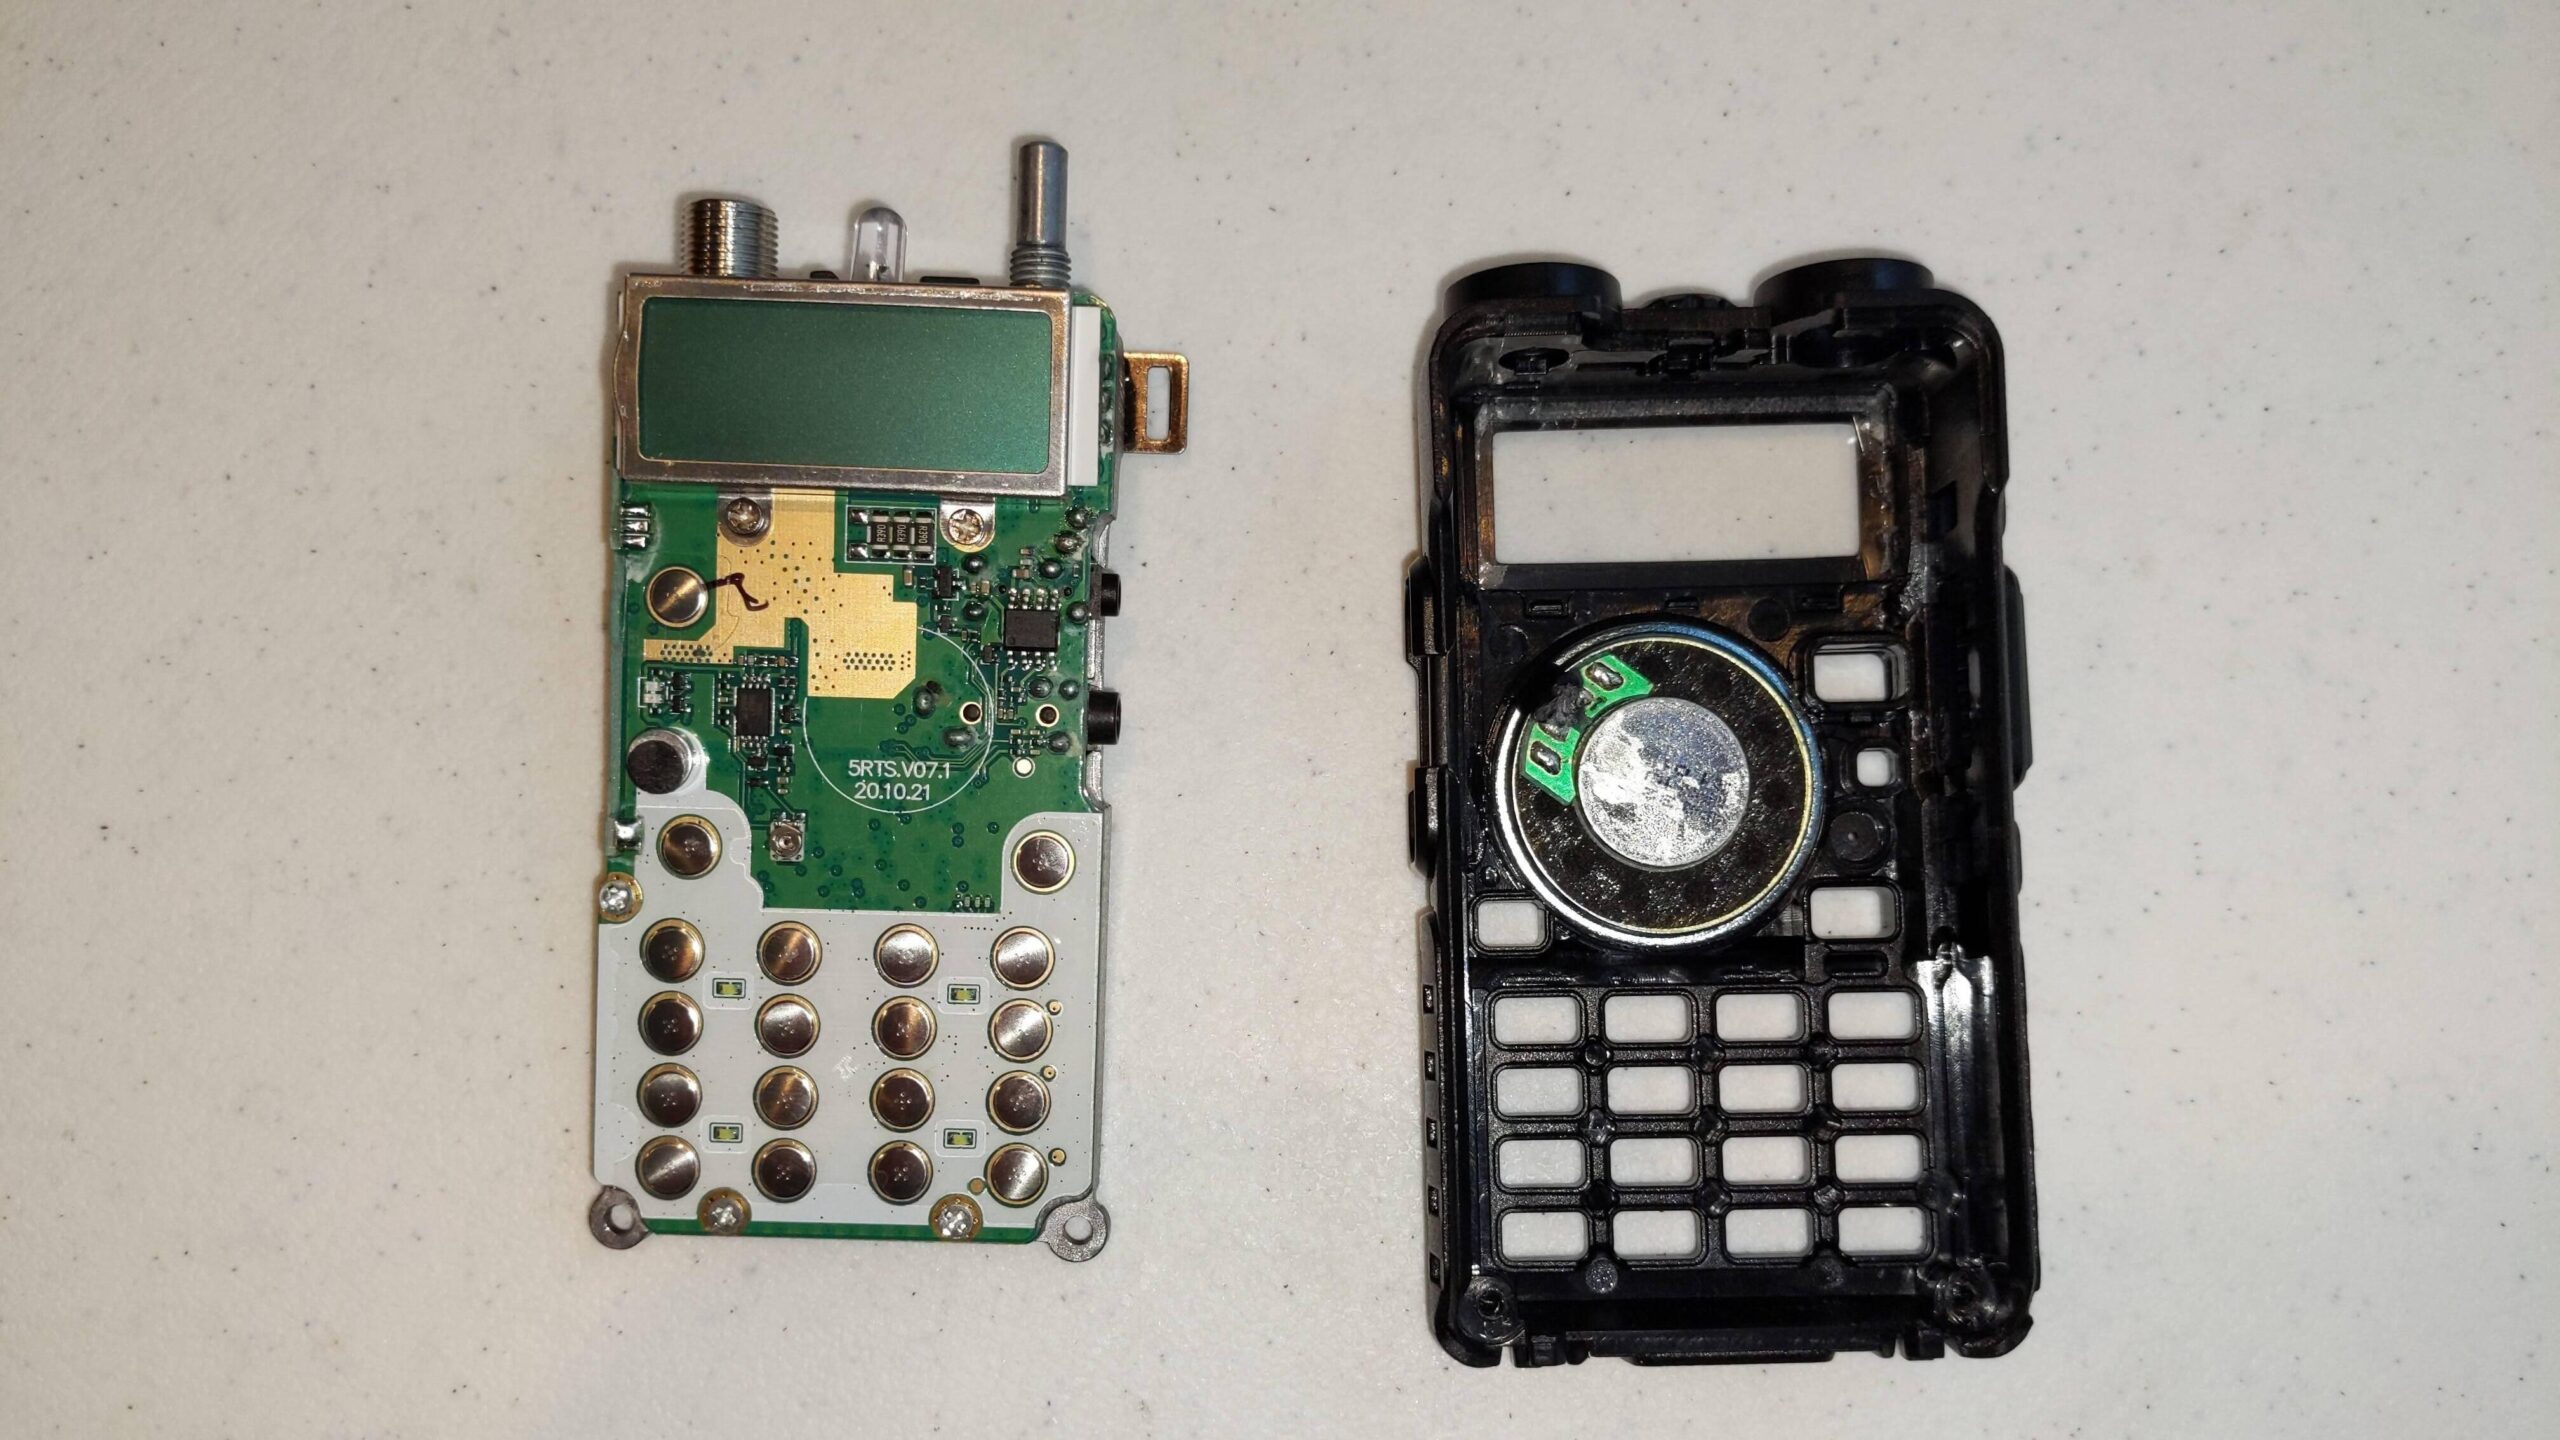 Baofeng UV5R, with internals removed from shell and speaker wire cut